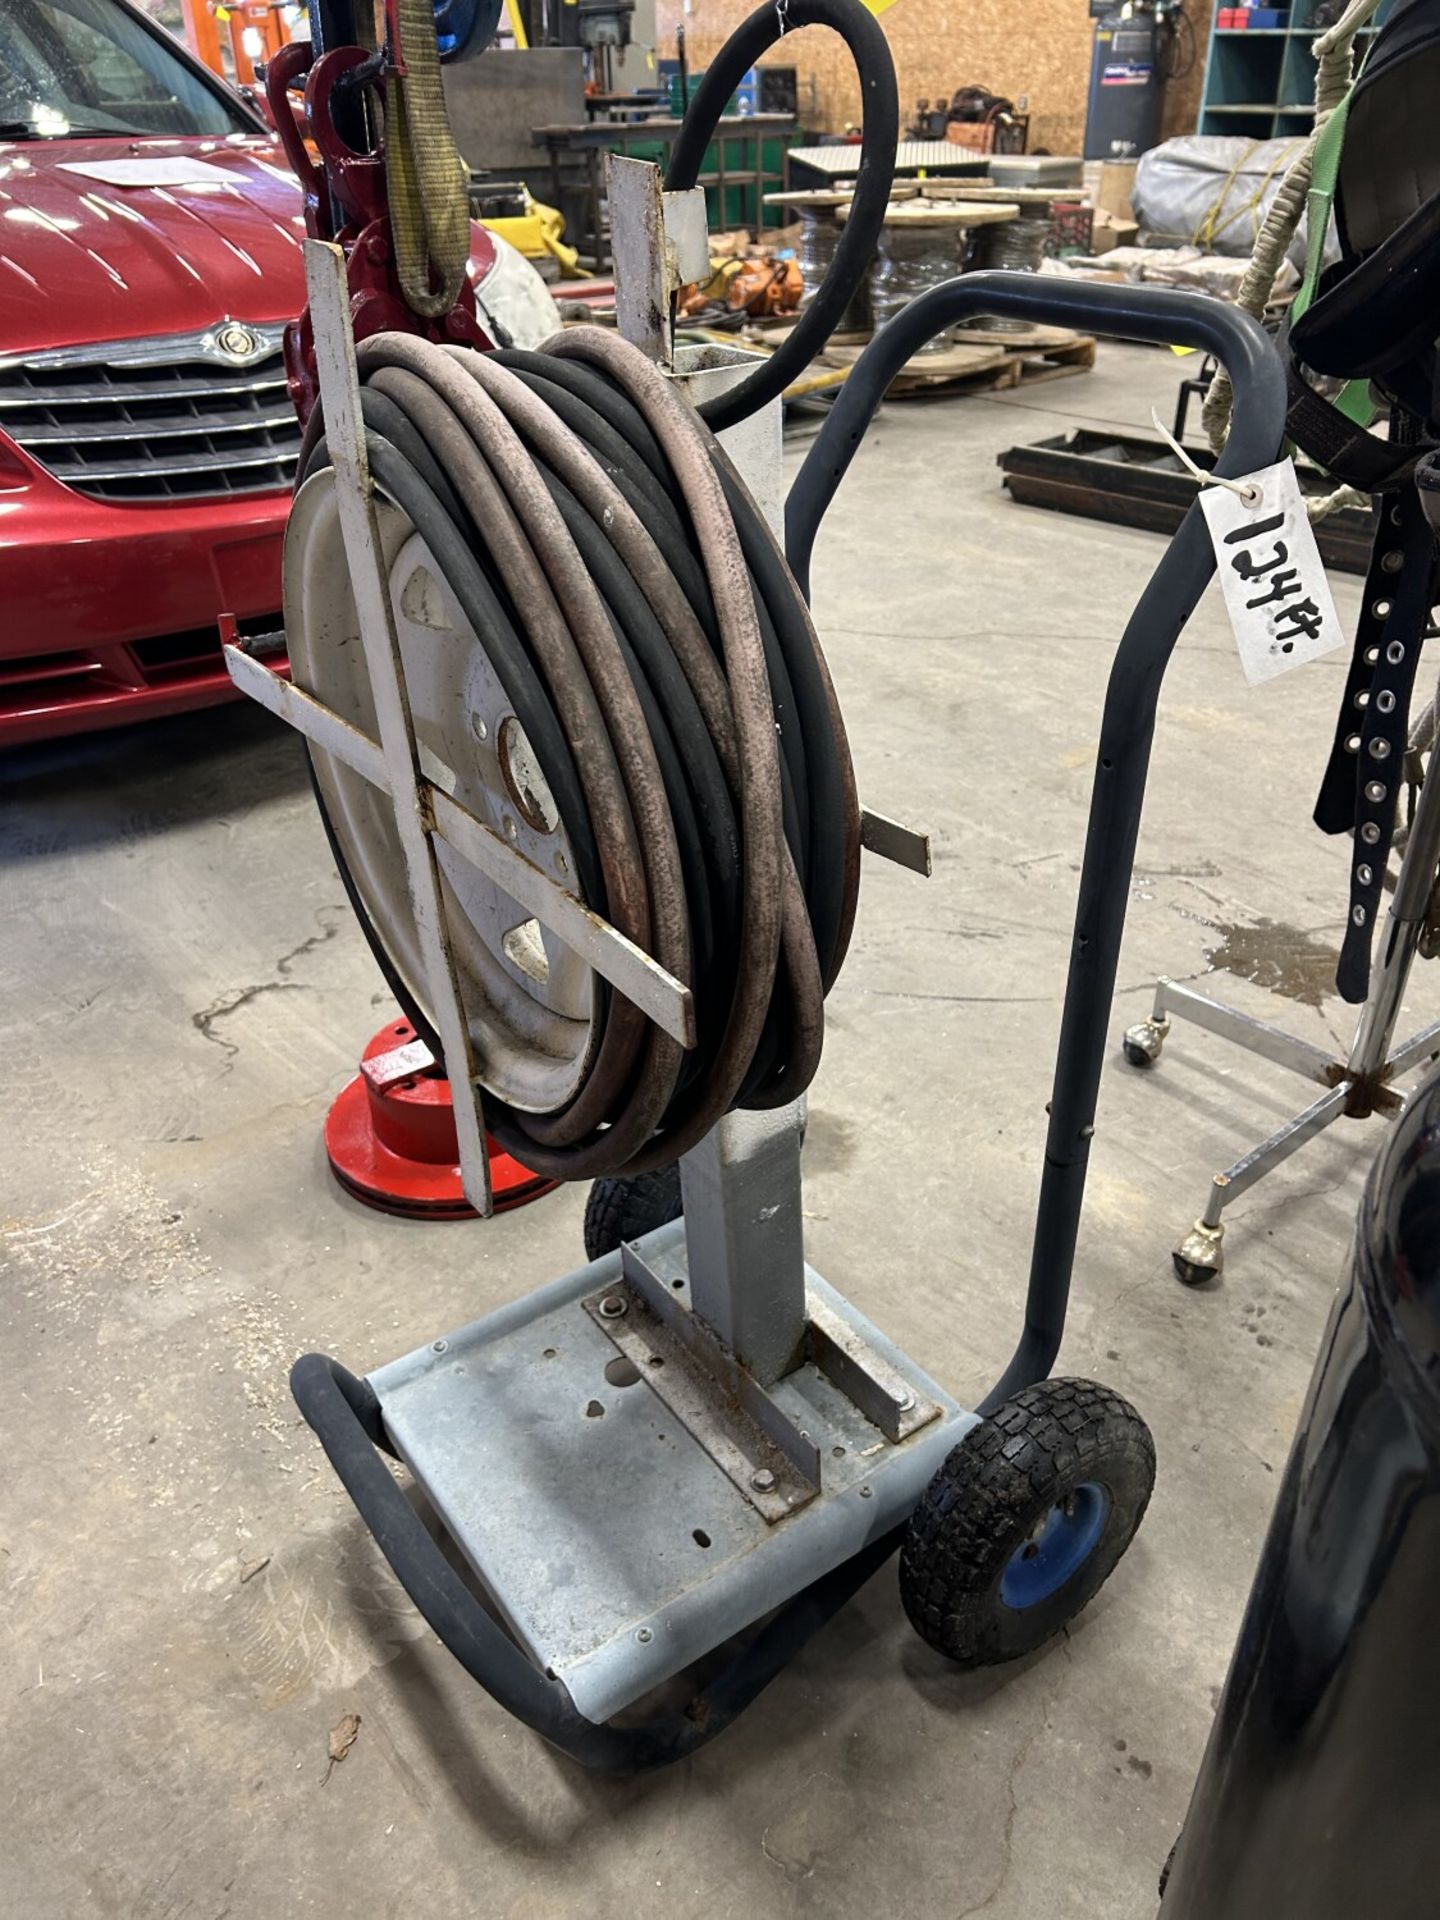 124' AIR HOSE MOUNTED ON ROLLING CART - Image 3 of 3